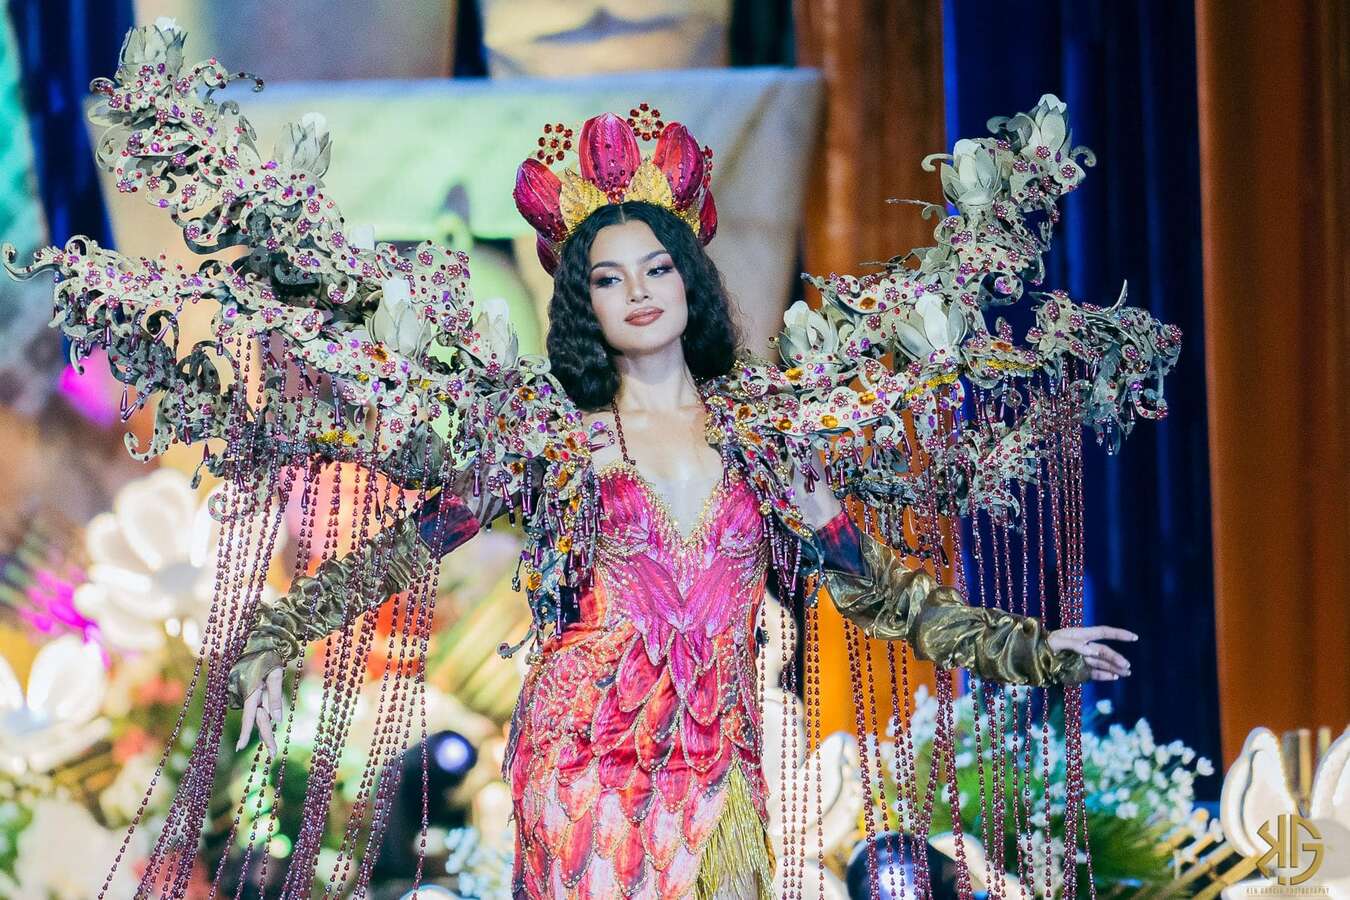 AFDQ 2020 Jannarie Zarzoso vies for the Miss Universe Philippines 2023 crown